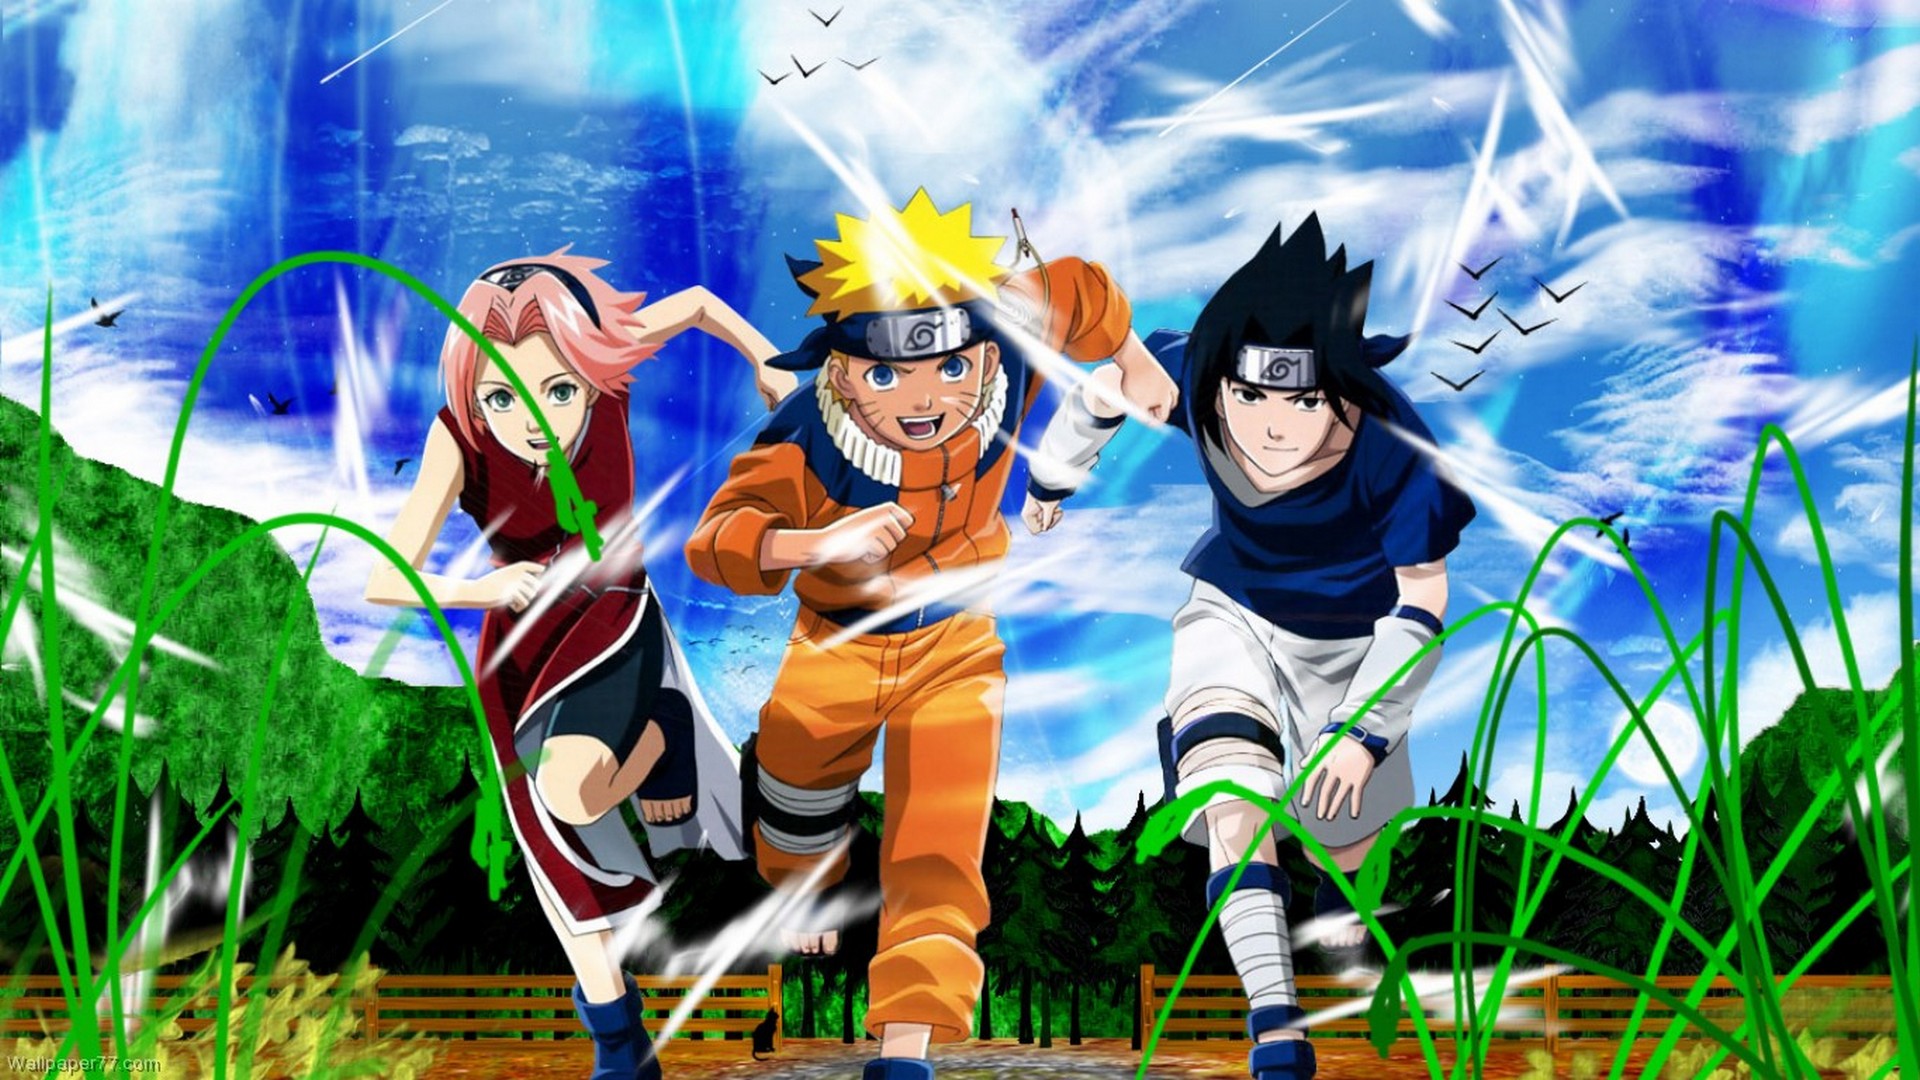 Naruto Movies Wallpaper HD with high-resolution 1920x1080 pixel. You can use this poster wallpaper for your Desktop Computers, Mac Screensavers, Windows Backgrounds, iPhone Wallpapers, Tablet or Android Lock screen and another Mobile device